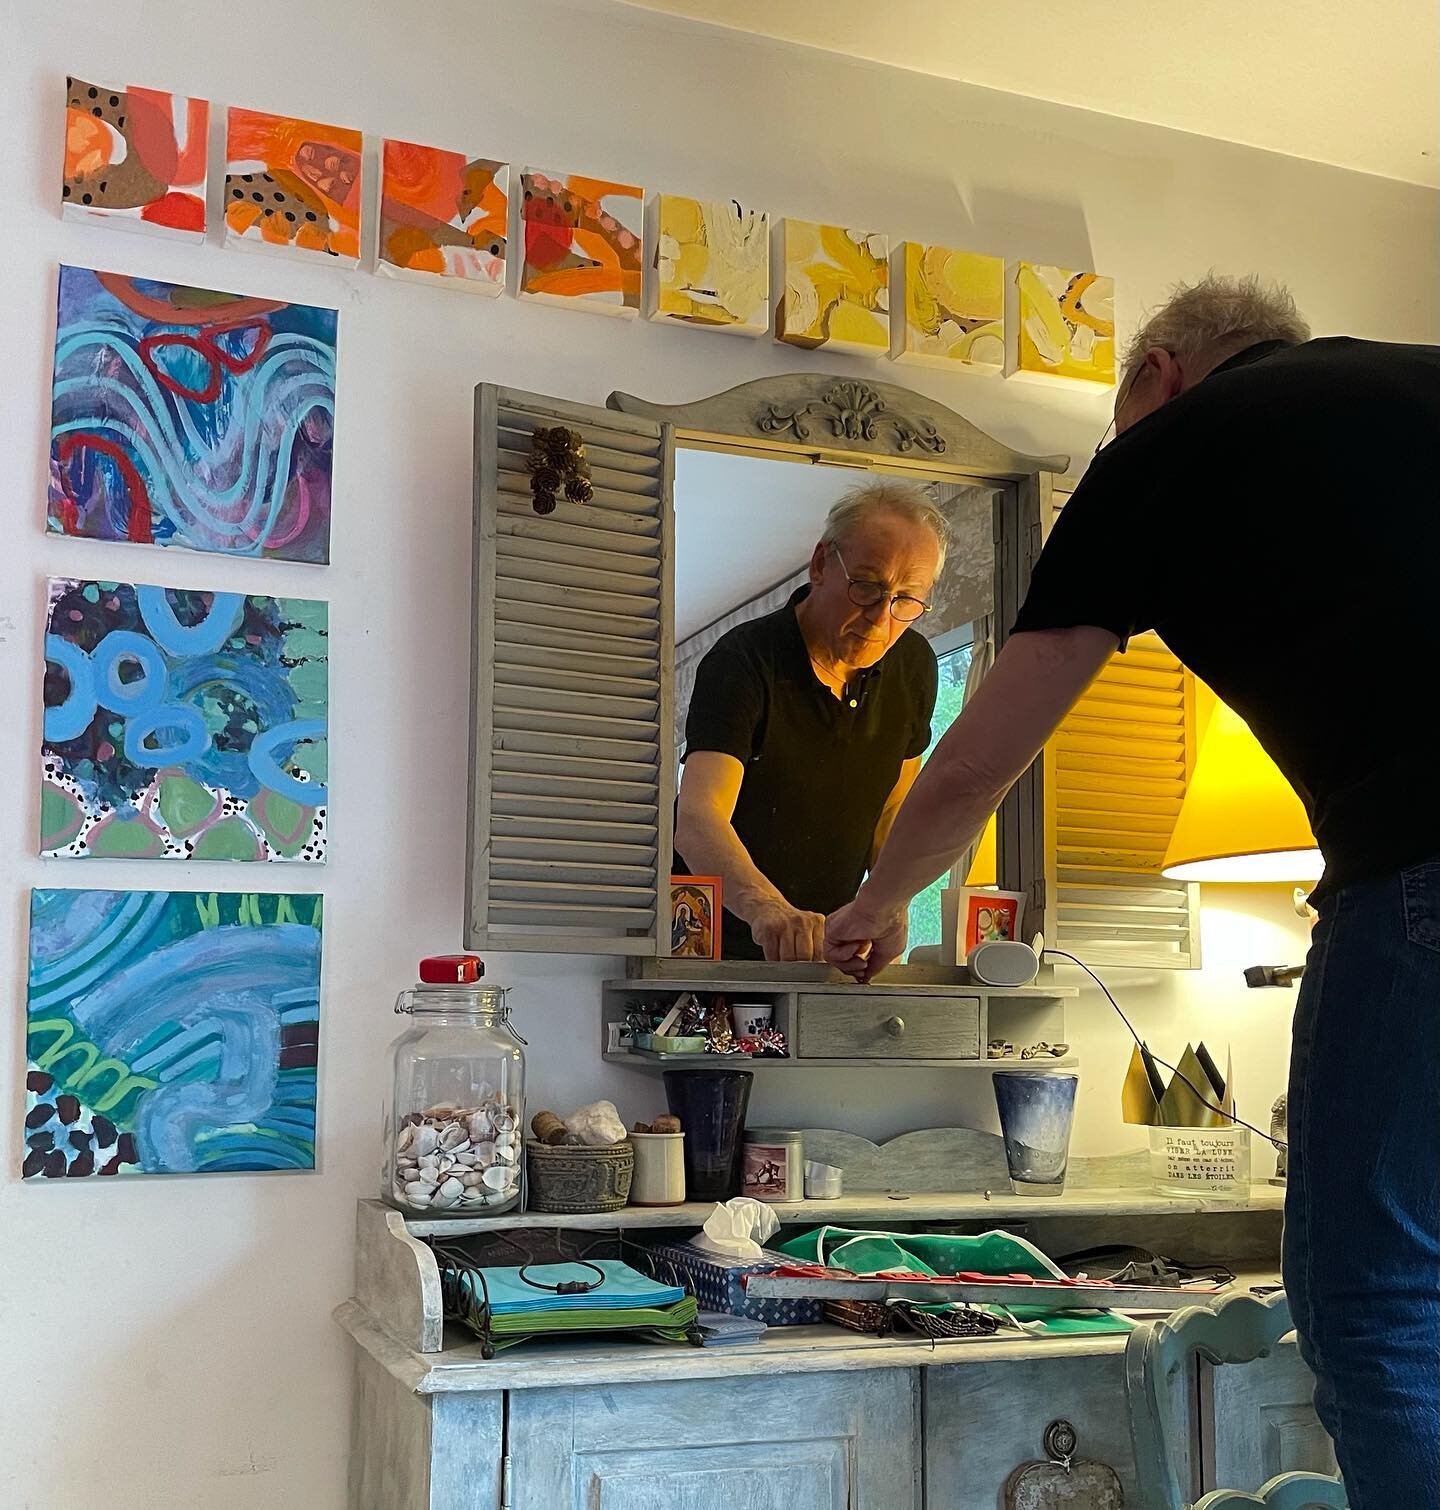 The dining room is my studio in France, so Antoine&rsquo;s hanging up works in progress 

#gratitude #studio #france #abstractart #contemporaryart #fineart #painter #colourlover